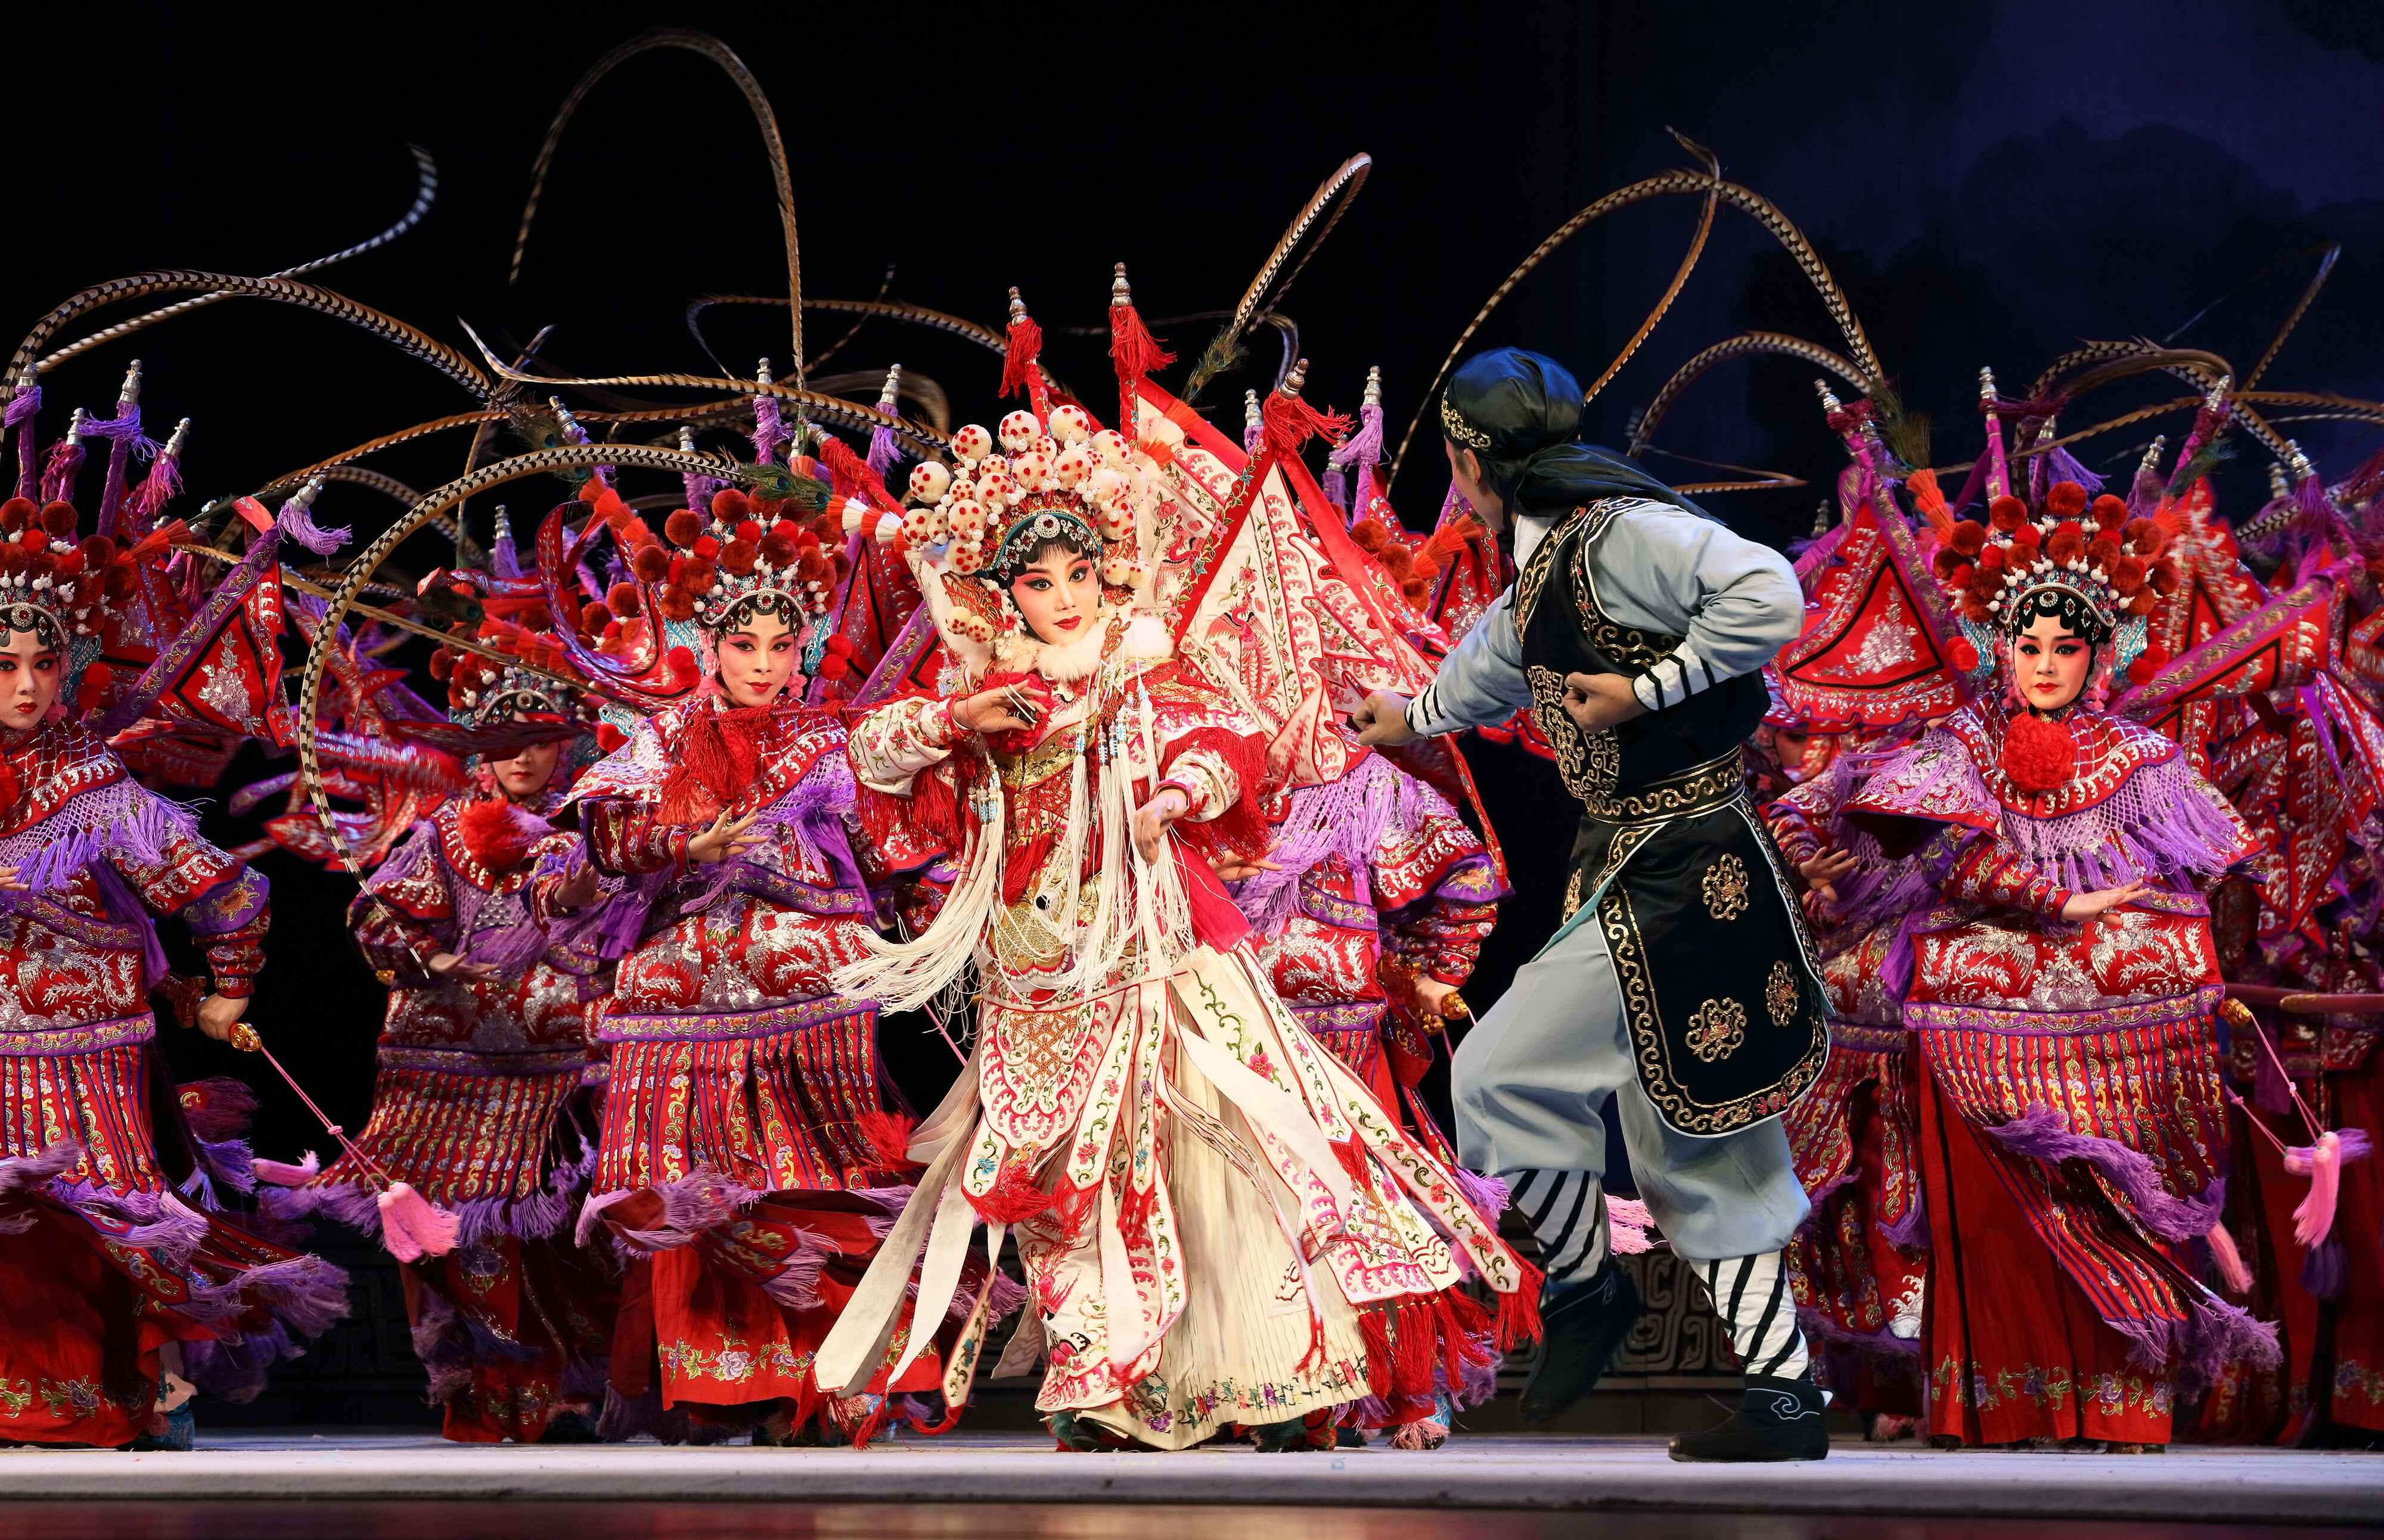 The Zhejiang Wu Opera Research Centre will return to Hong Kong to stage three Wu opera performances in late July at the inaugural Chinese Culture Festival, organised by the Leisure and Cultural Services Department. Photo shows a scene from "Mu Guiying".
